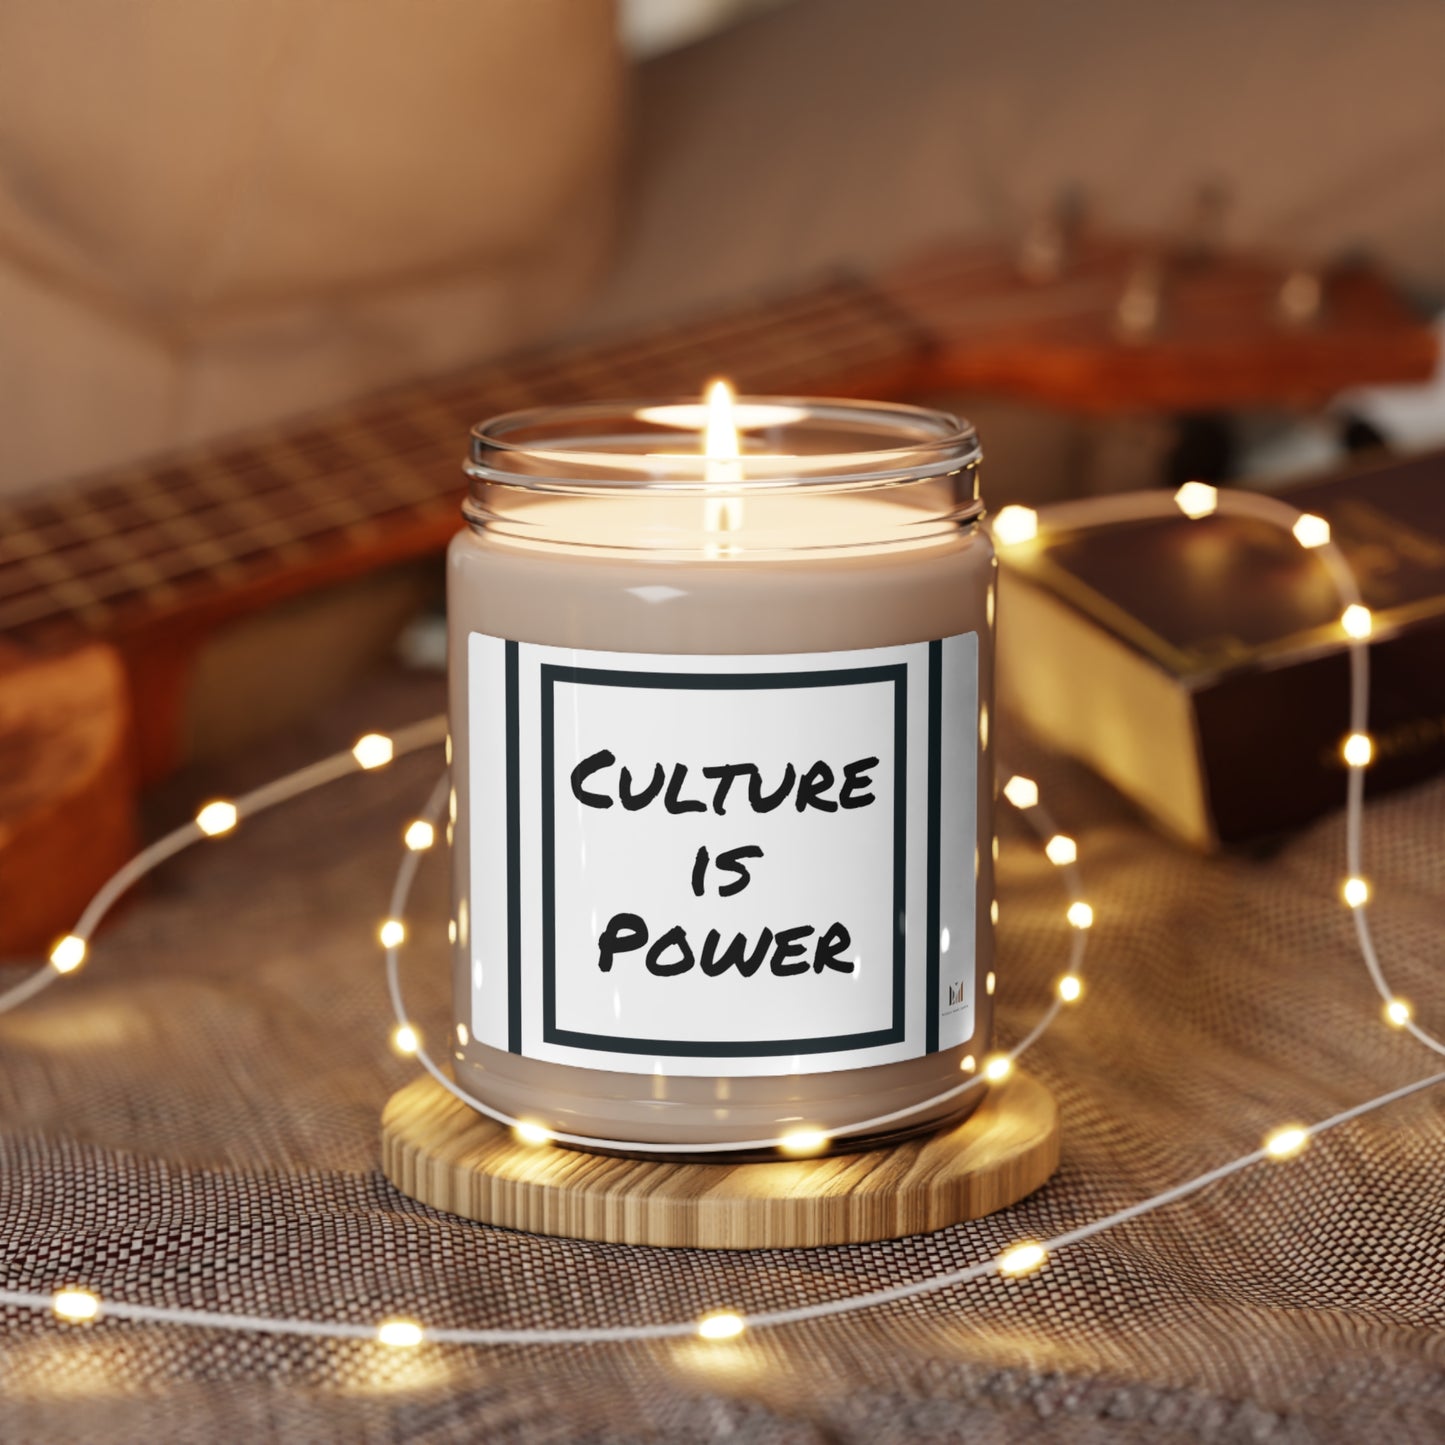 "Culture" Scented Soy Candle, 9oz